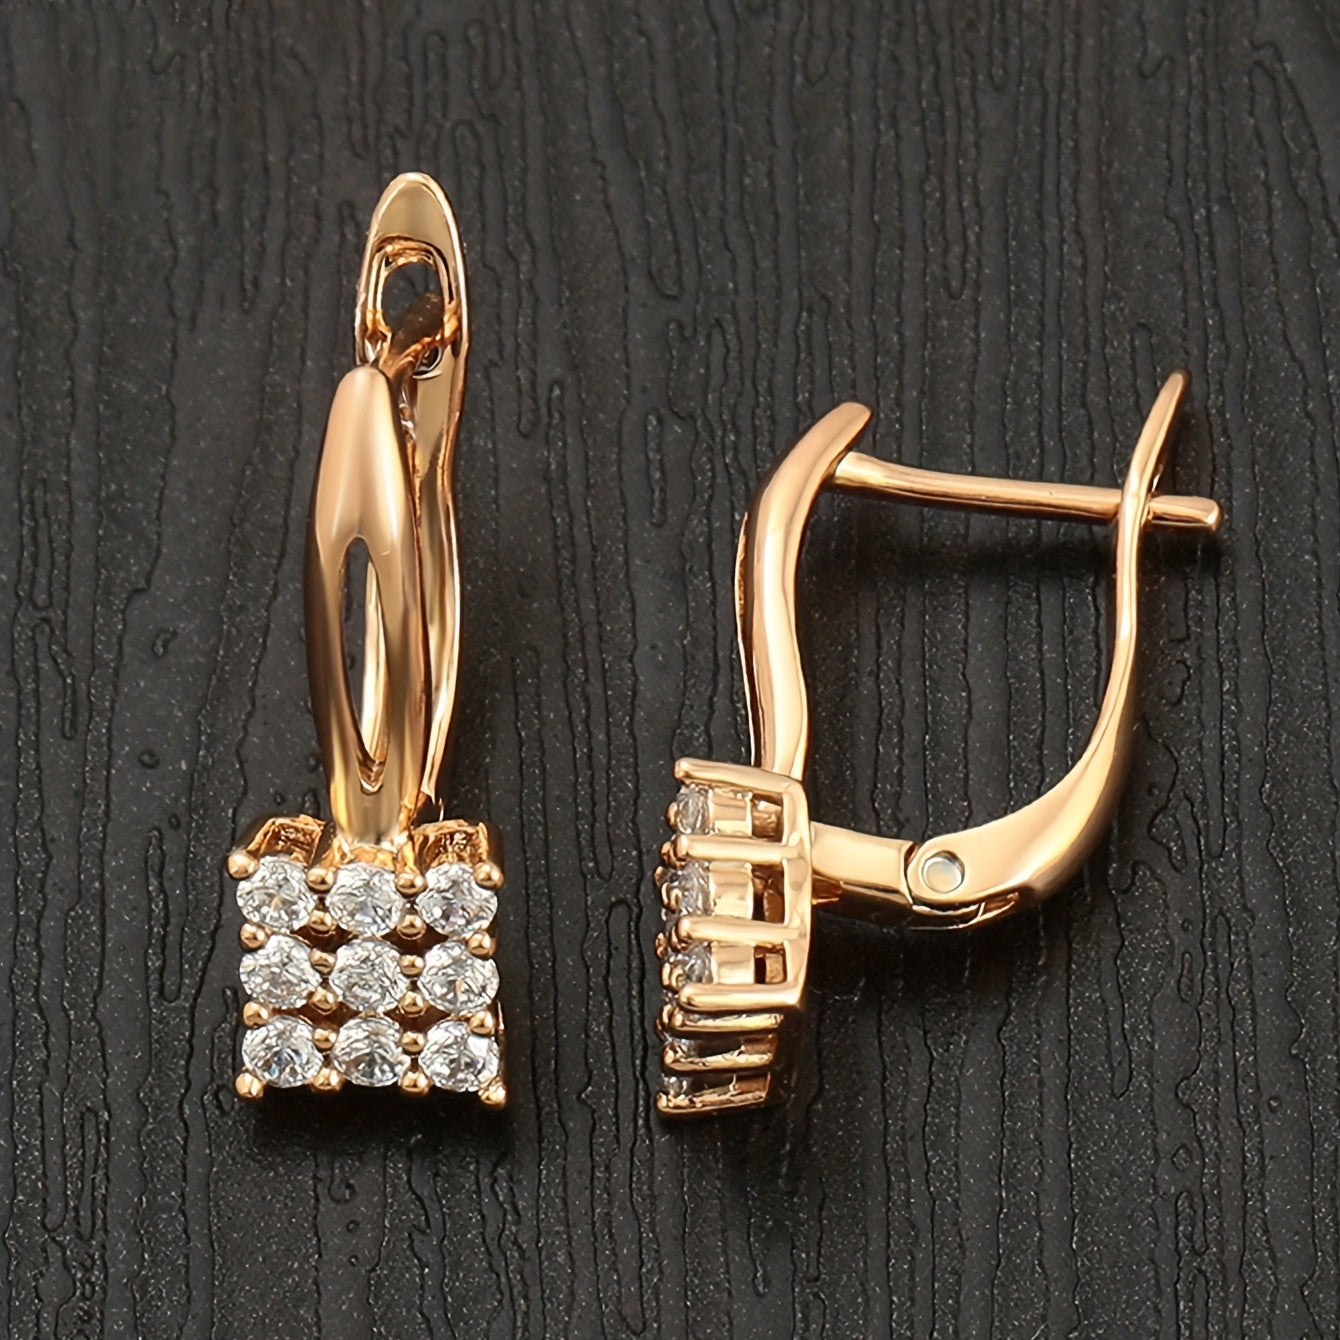 Luxurious 18K Gold Plated Rhombus Clip On Earrings - Perfect for Banquet Ornaments!